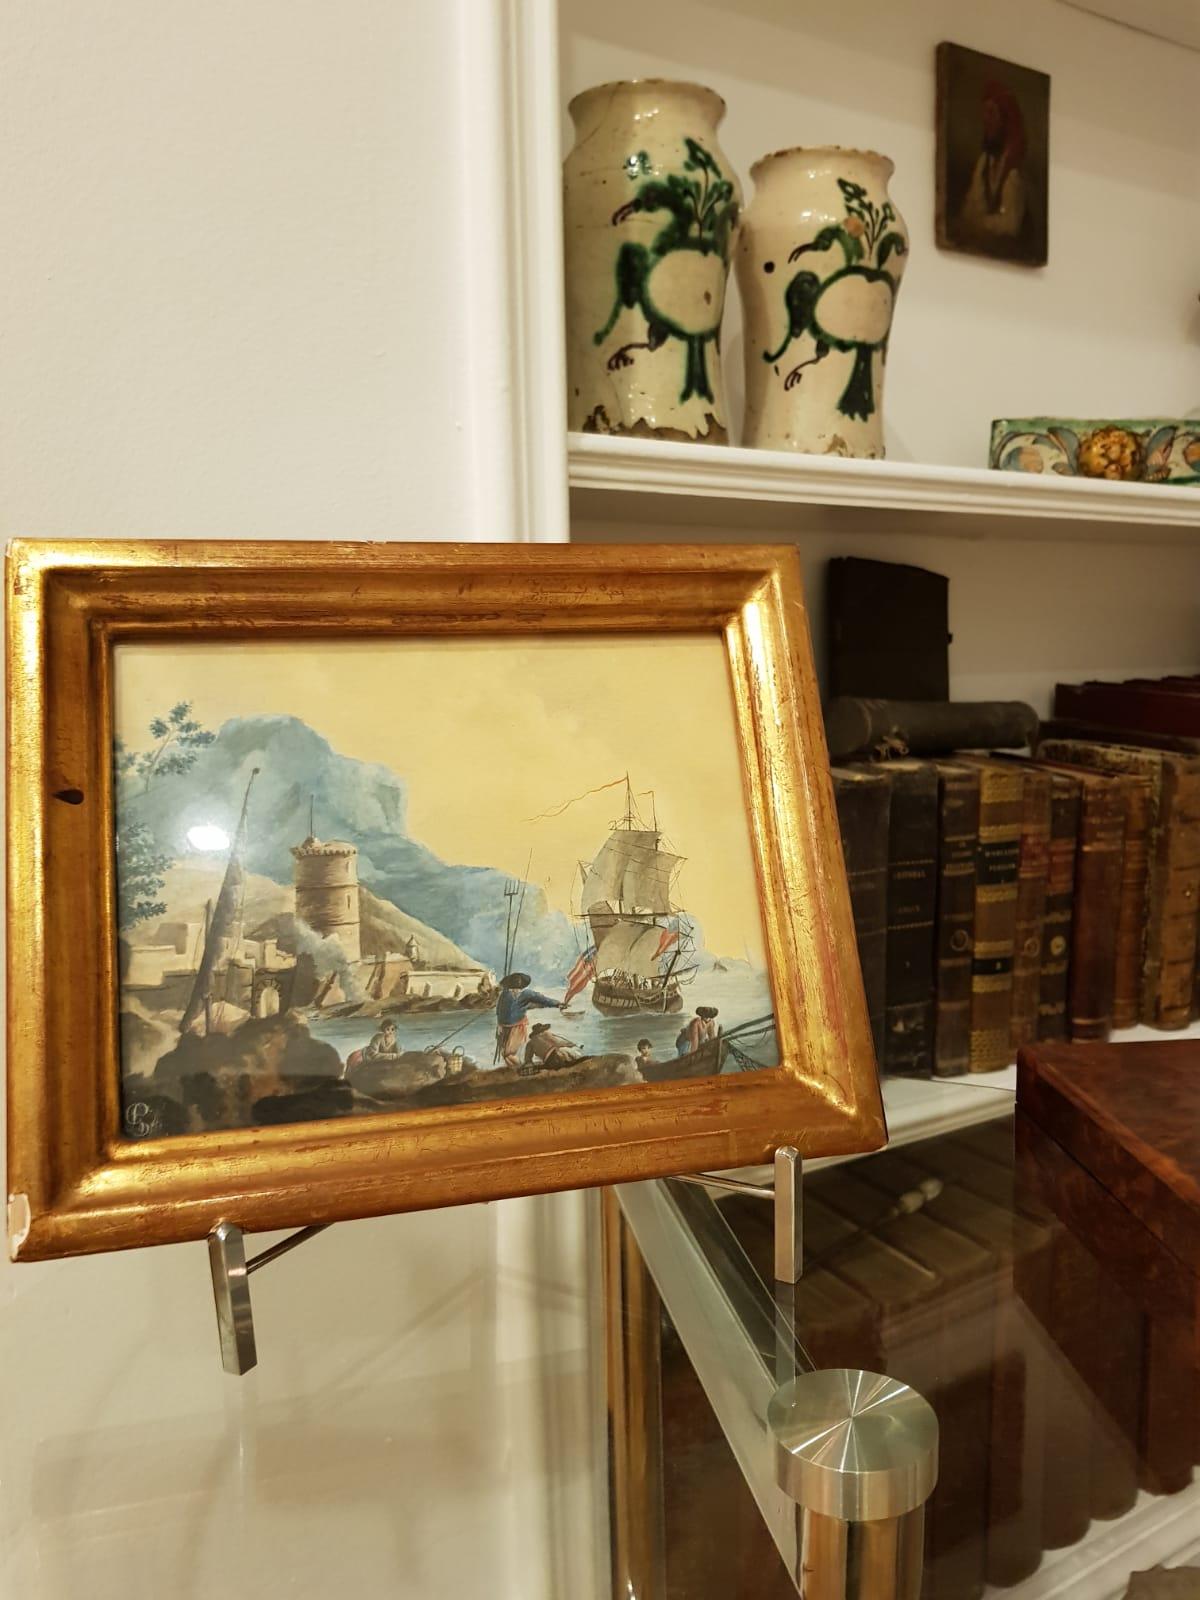 An extremely valuable piece for collectors of Americana and United States Naval / Military historical items which is current housed in the private collection of a Spanish noble.

The piece depicts the Corvette U.S.S. Washington of the newly formed